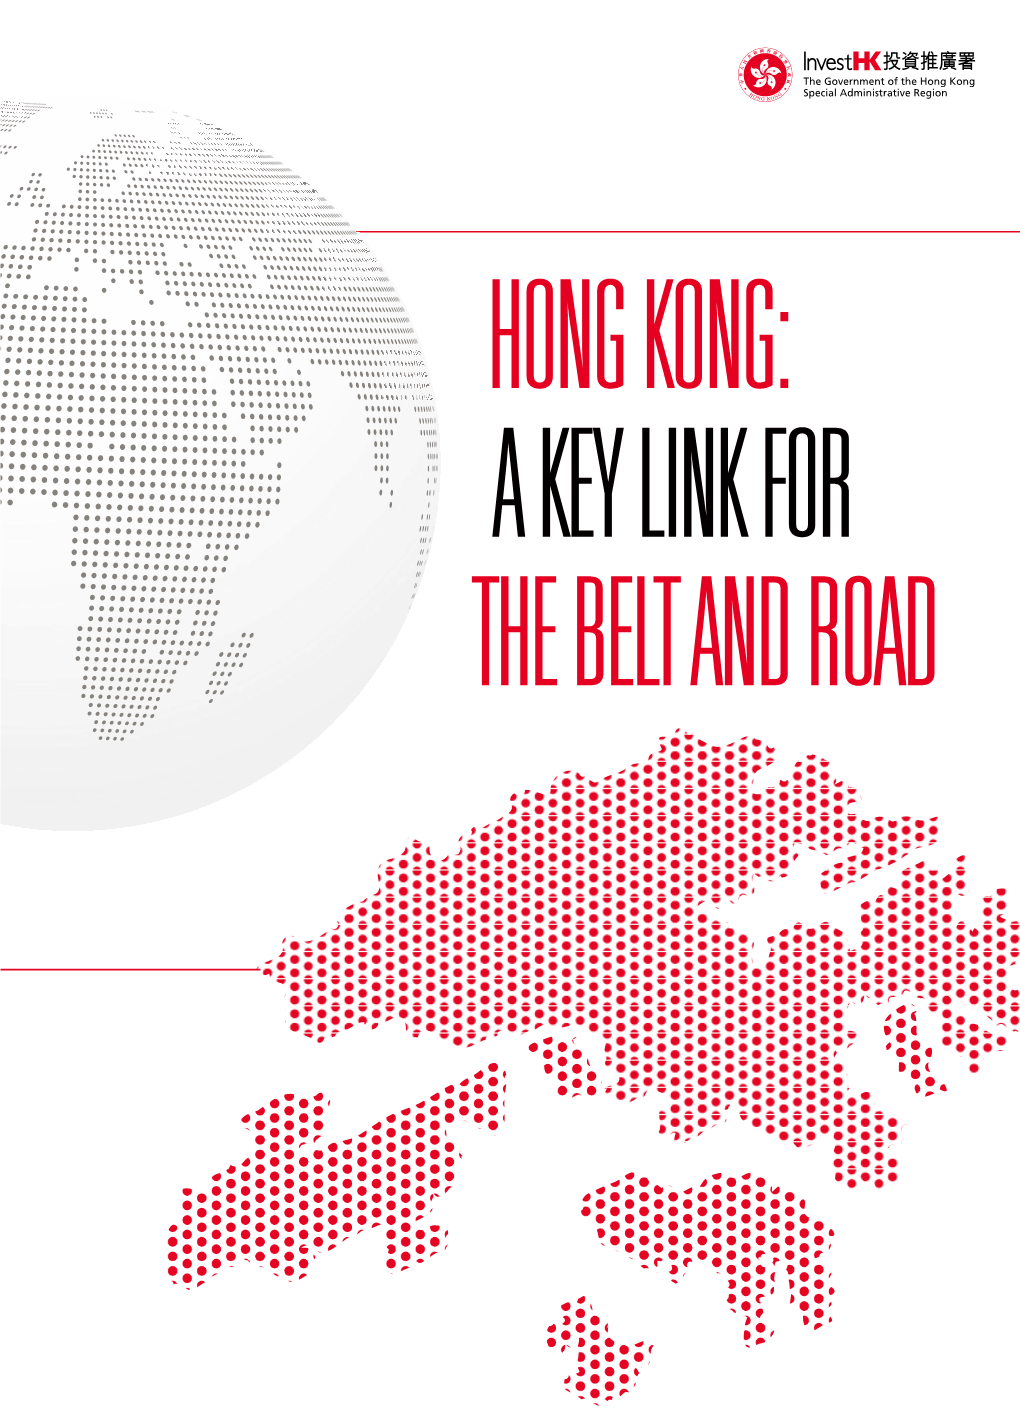 Hong Kong: a Key Link for the Belt and Road